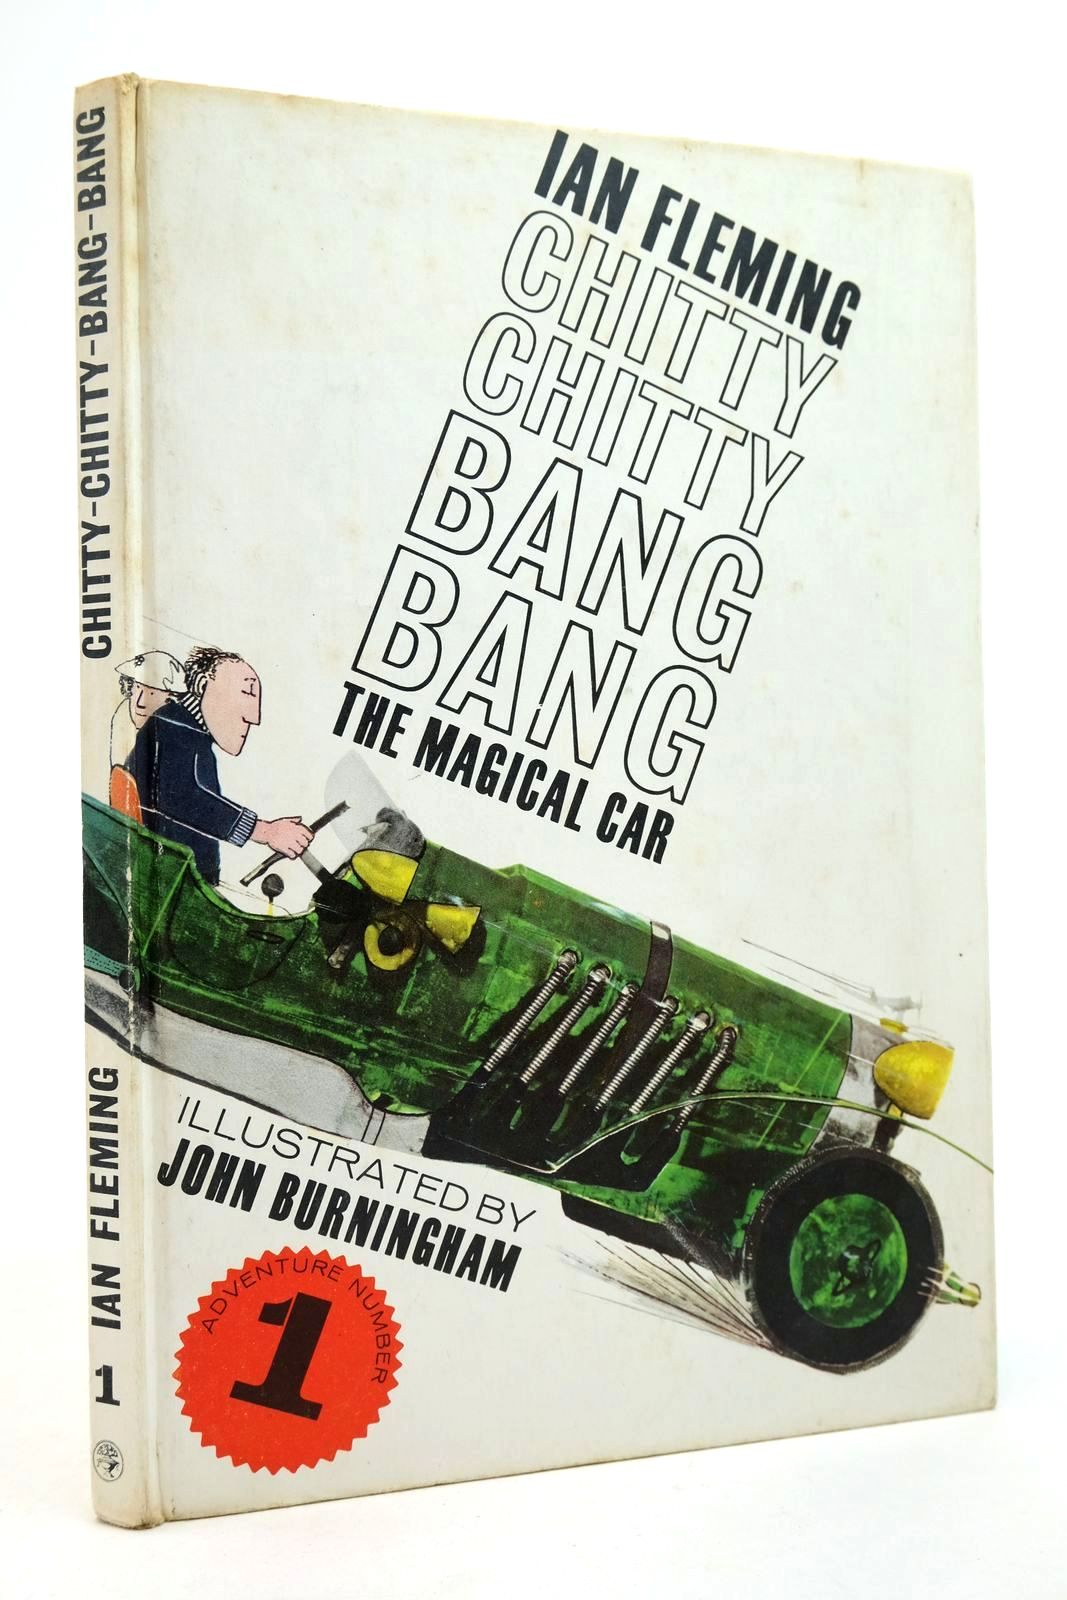 Photo of CHITTY CHITTY BANG BANG THE MAGICAL CAR - ADVENTURE NUMBER 1- Stock Number: 2140297